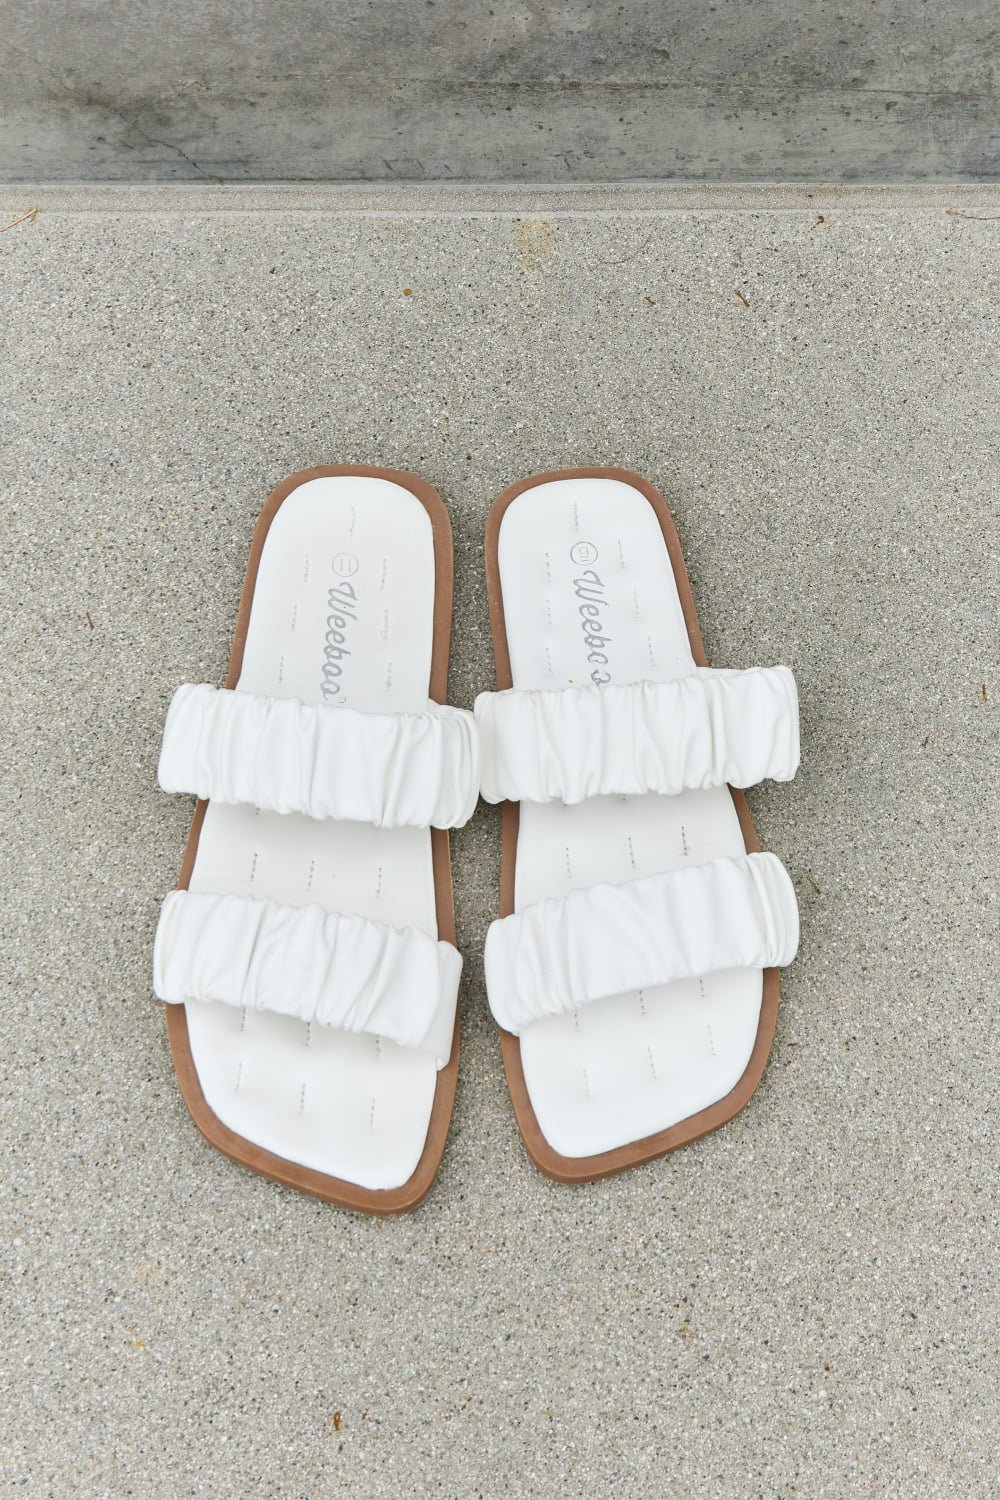 Weeboo Double Strap Scrunch Sandal in White - Fashion Girl Online Store